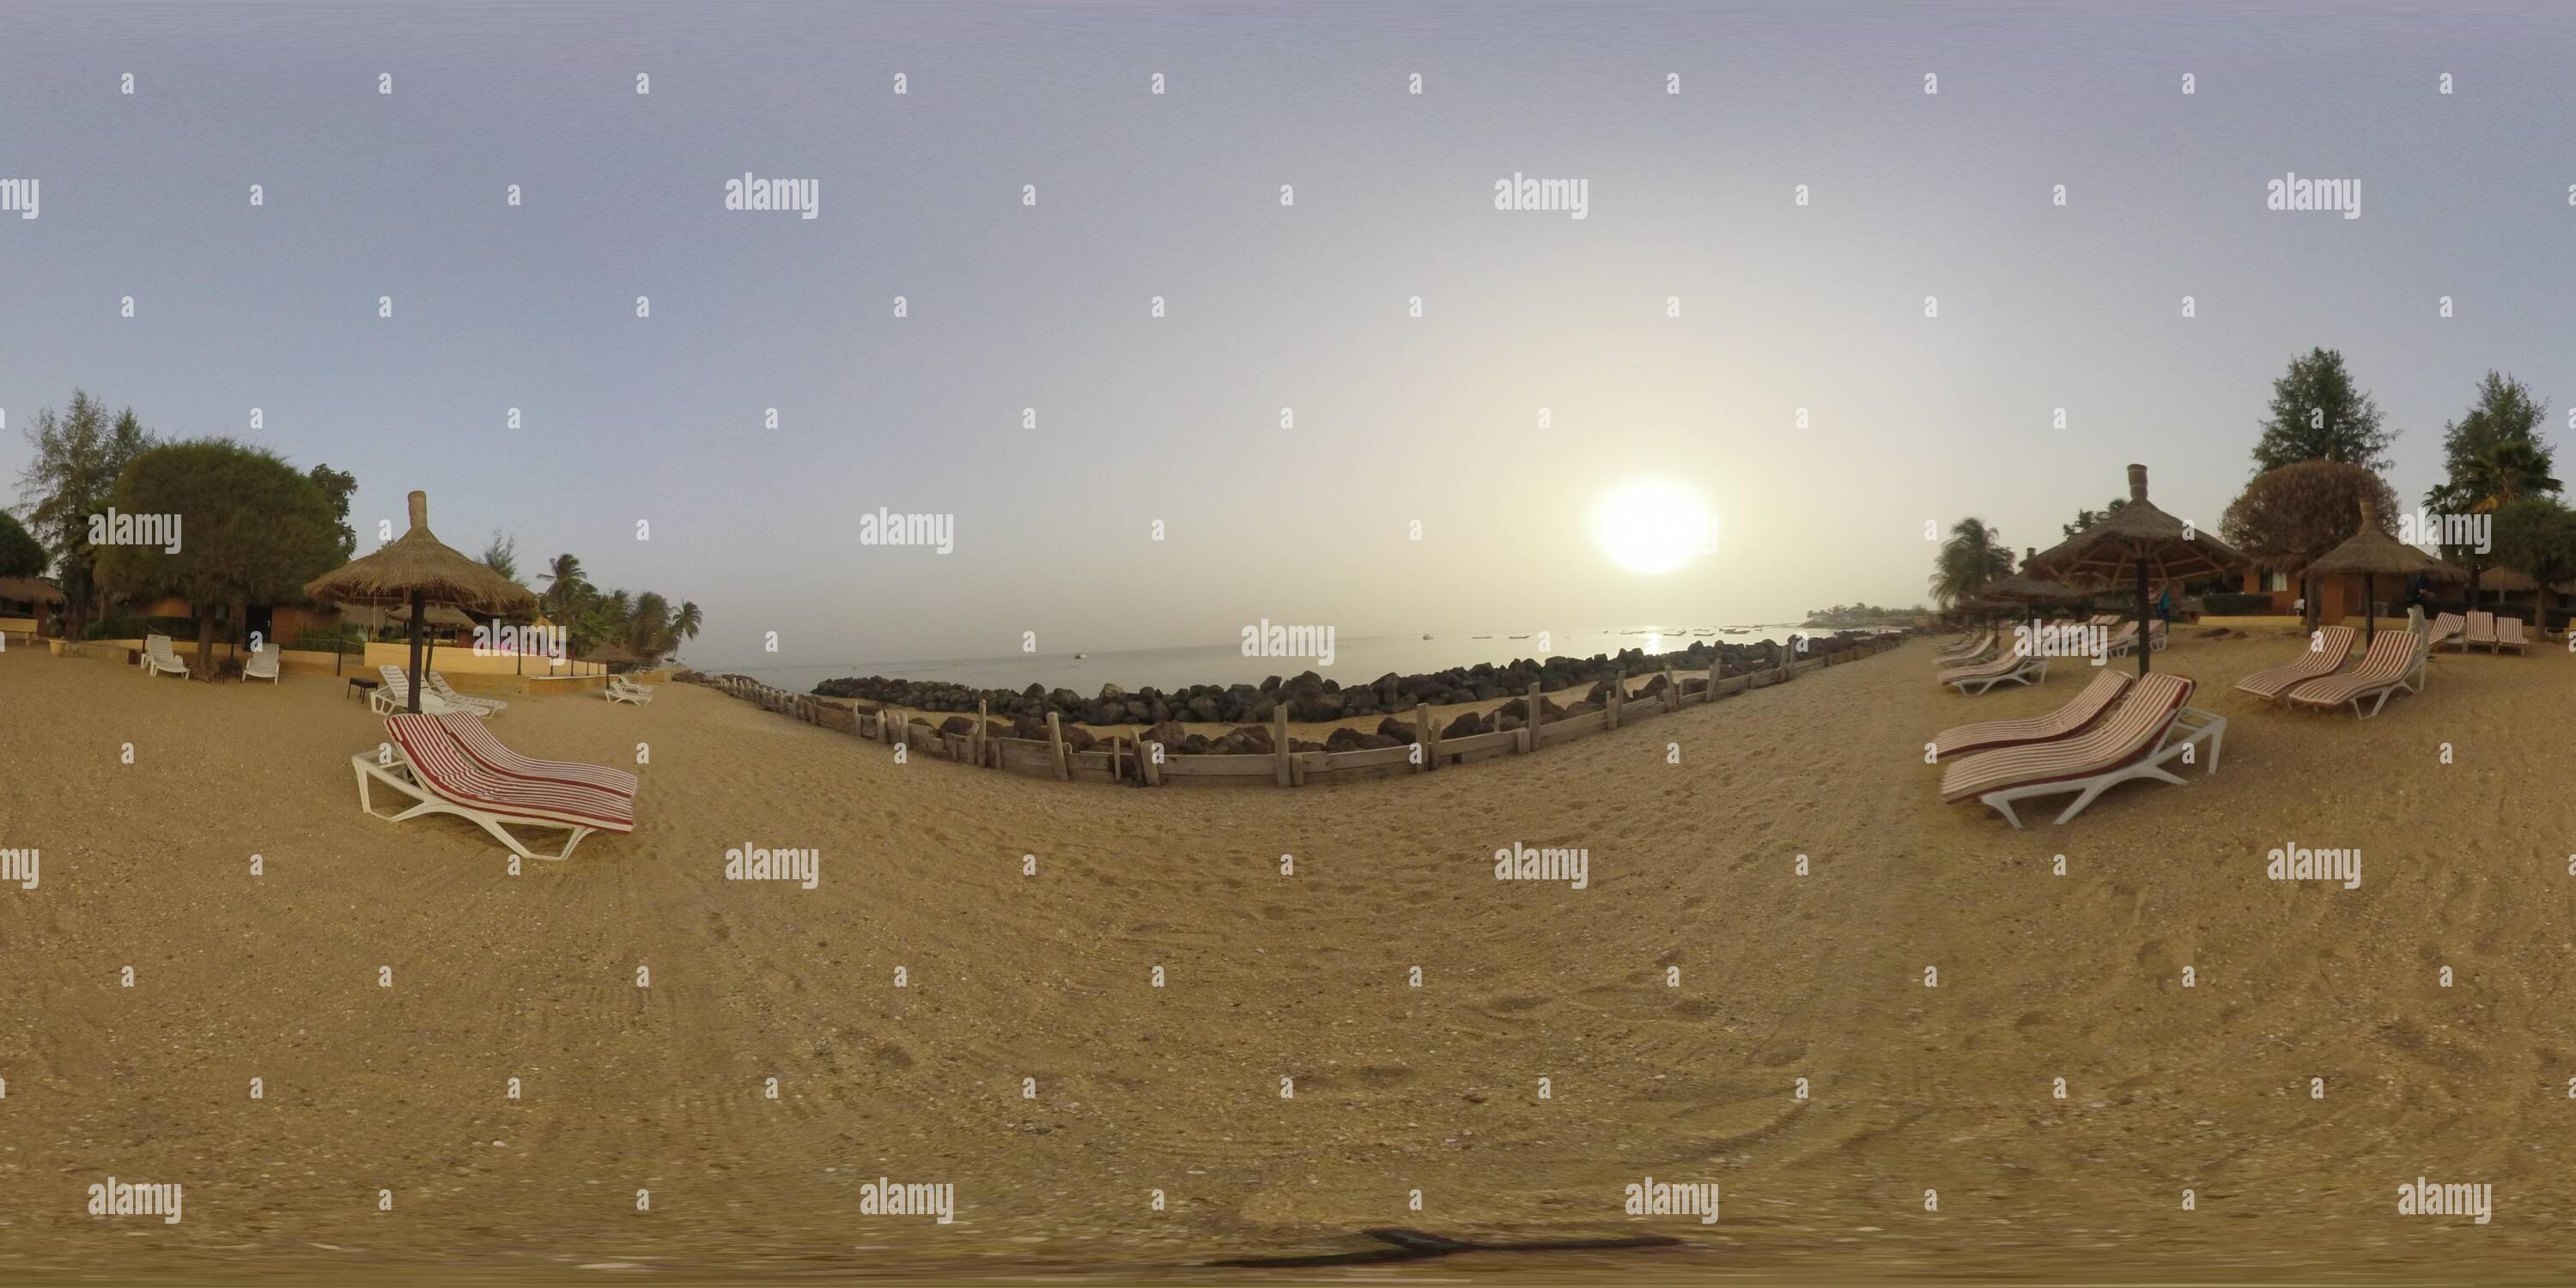 360 degree panoramic view of M´Bour, Senegal, 12th March 2019: 360 image of vacation resort by the sea